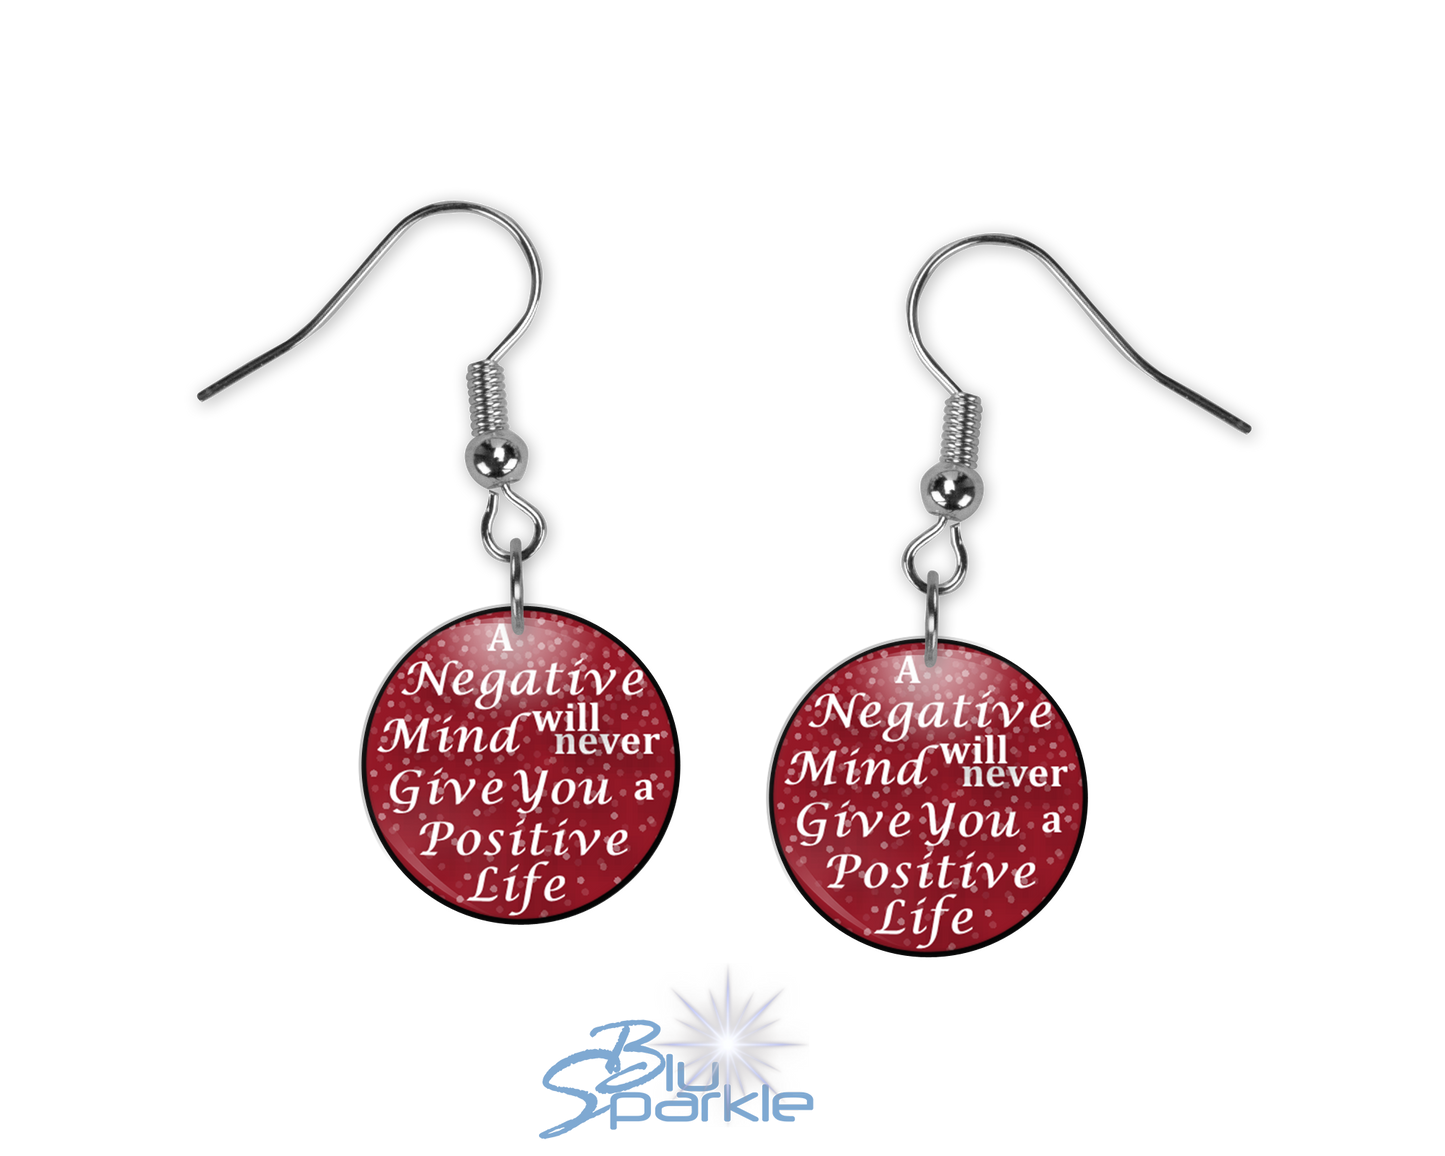 A Negative Mind Will Never Give You A Positive Life - Earrings